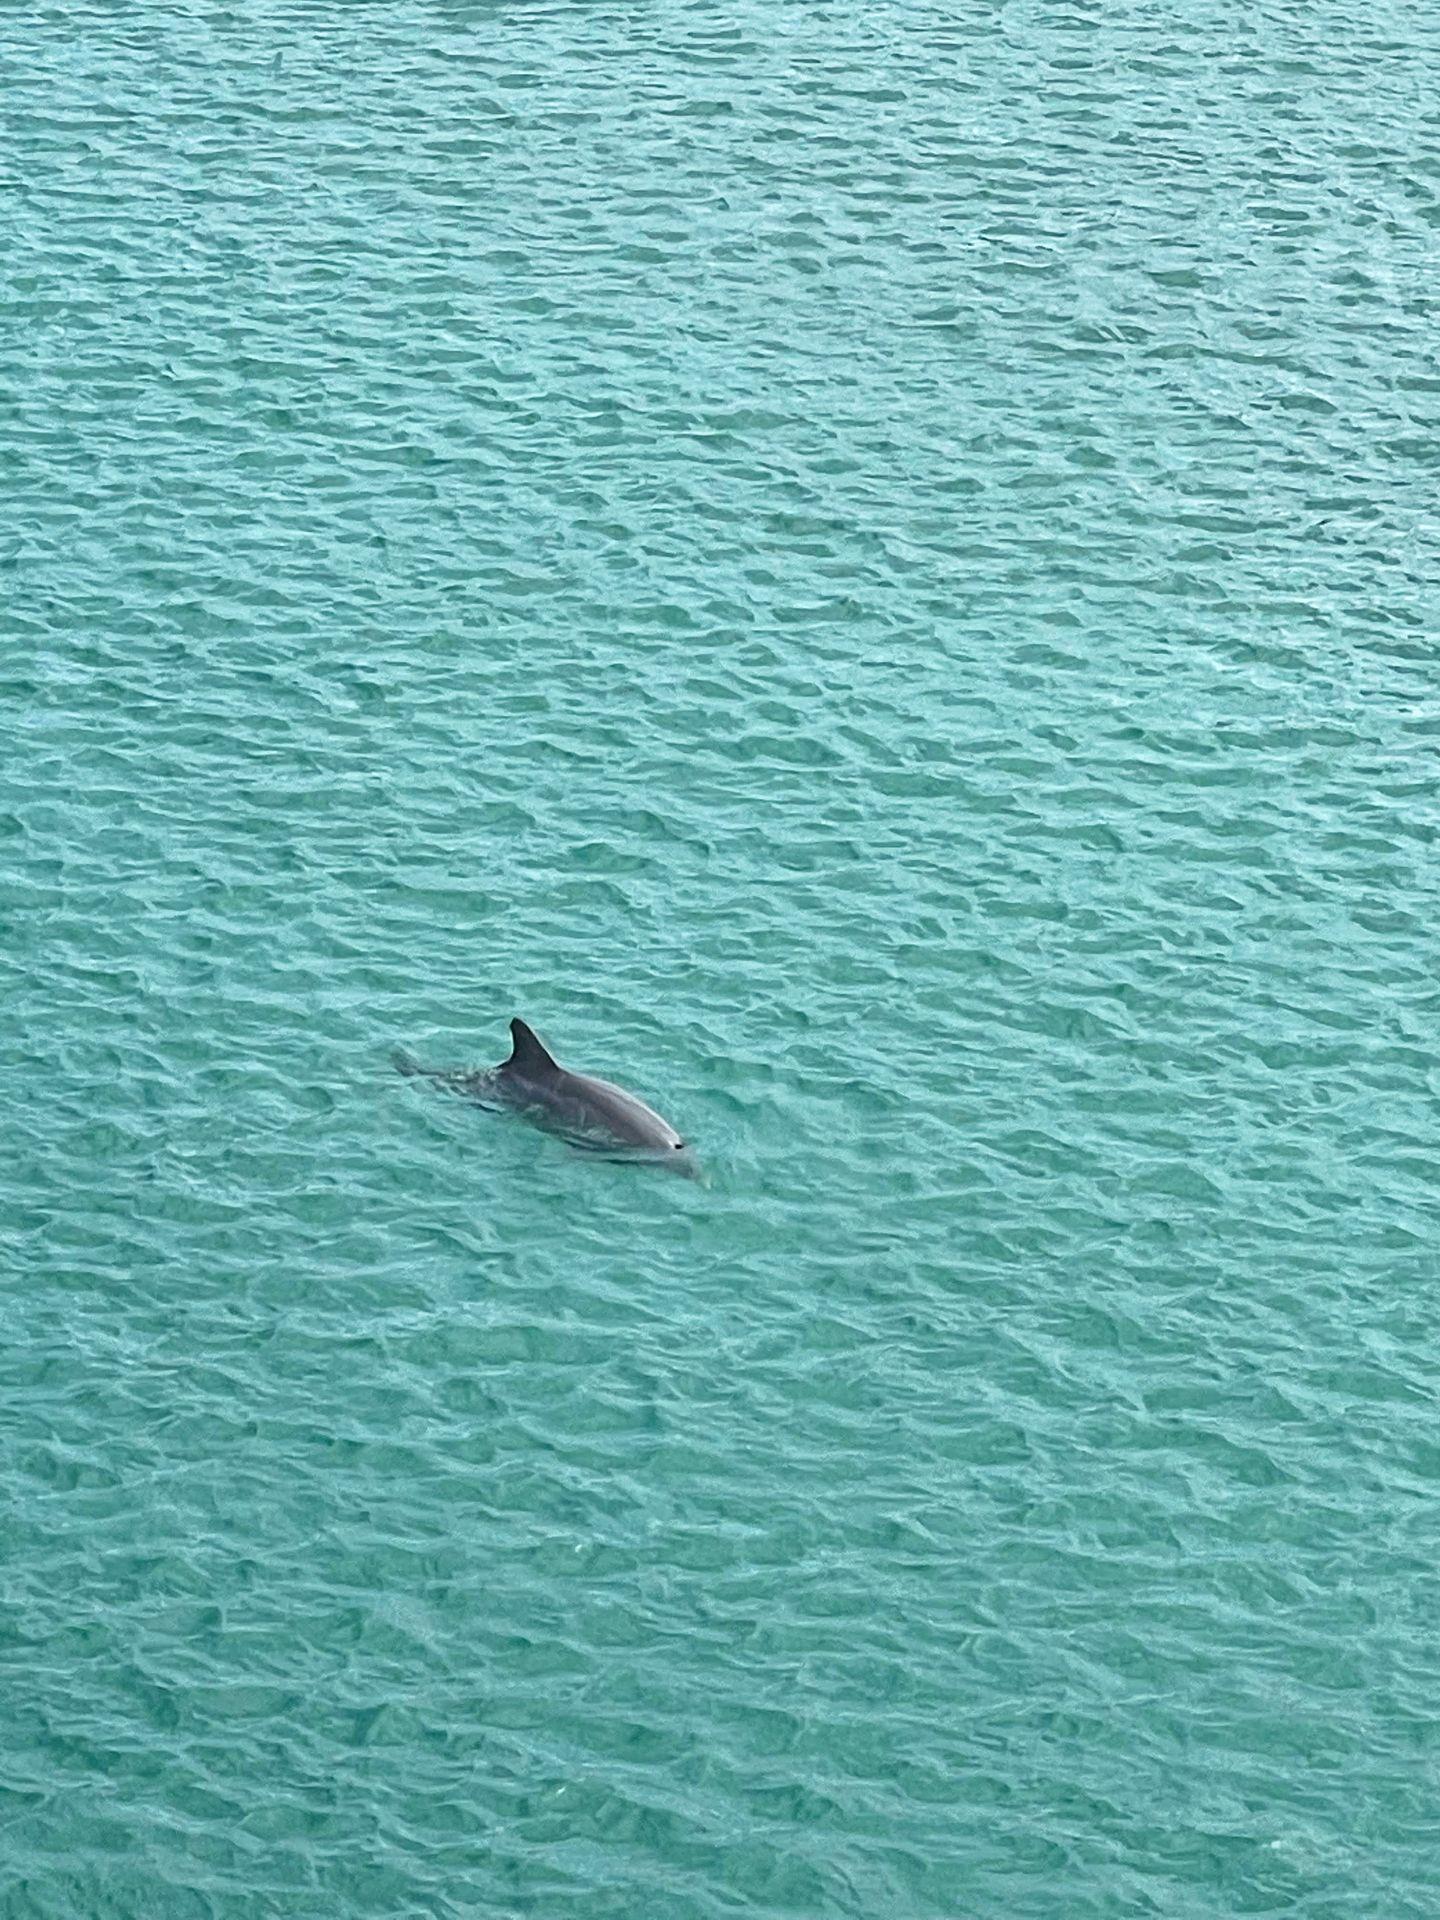 A dolphin swimming in the bay with a fin above the water